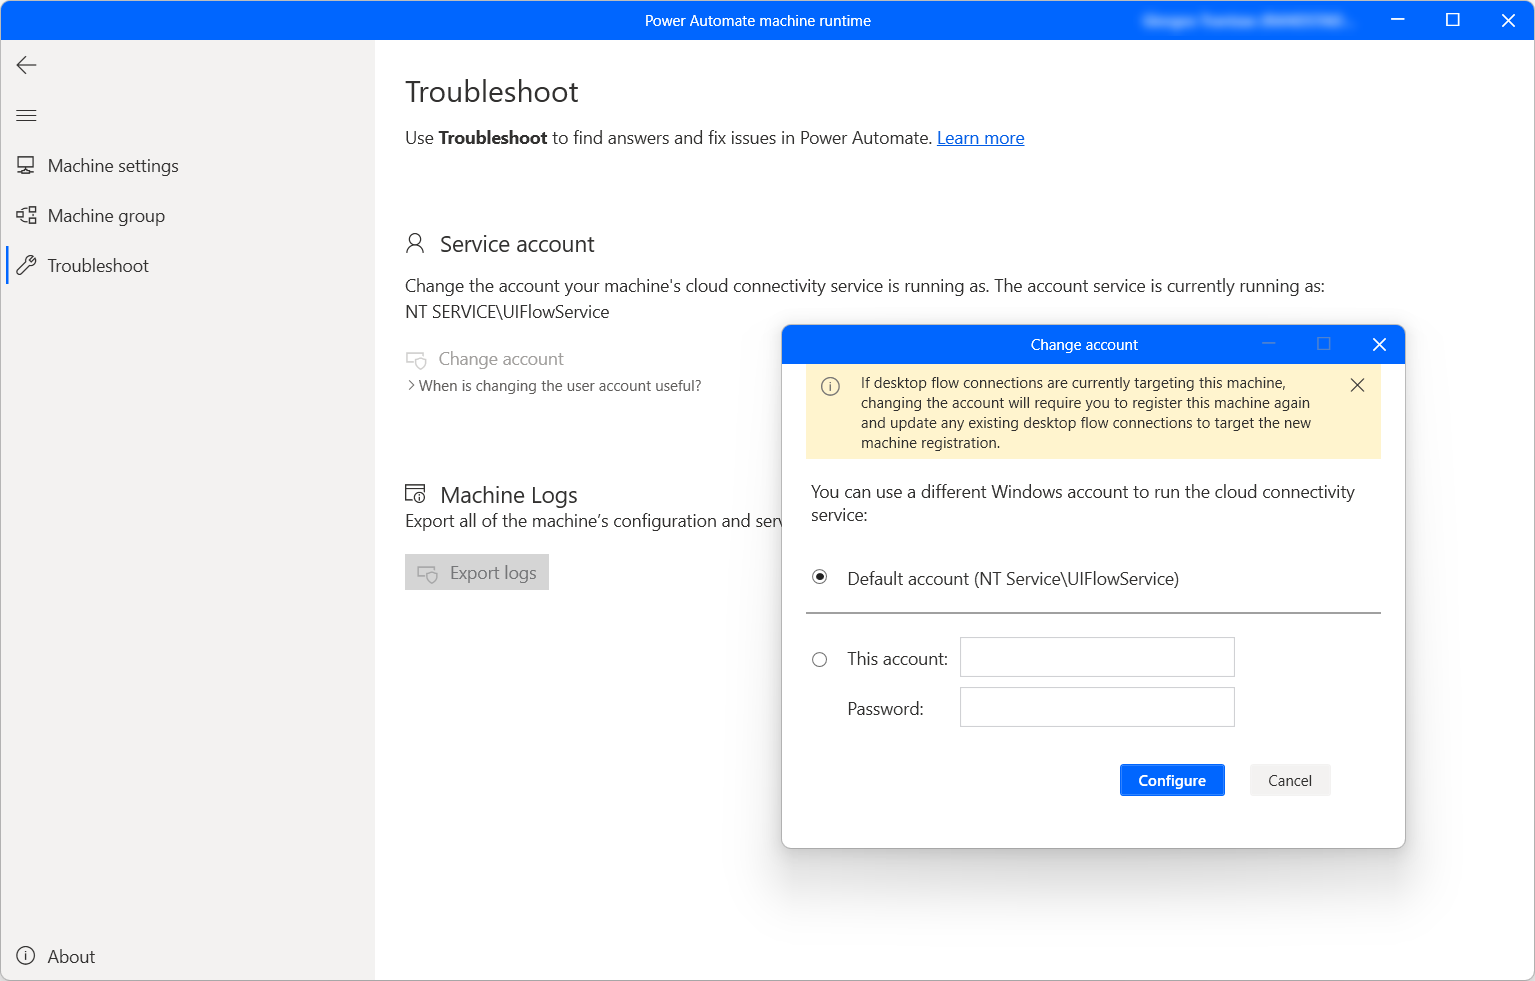 Screenshot of the Power Automate troubleshoot dialog.